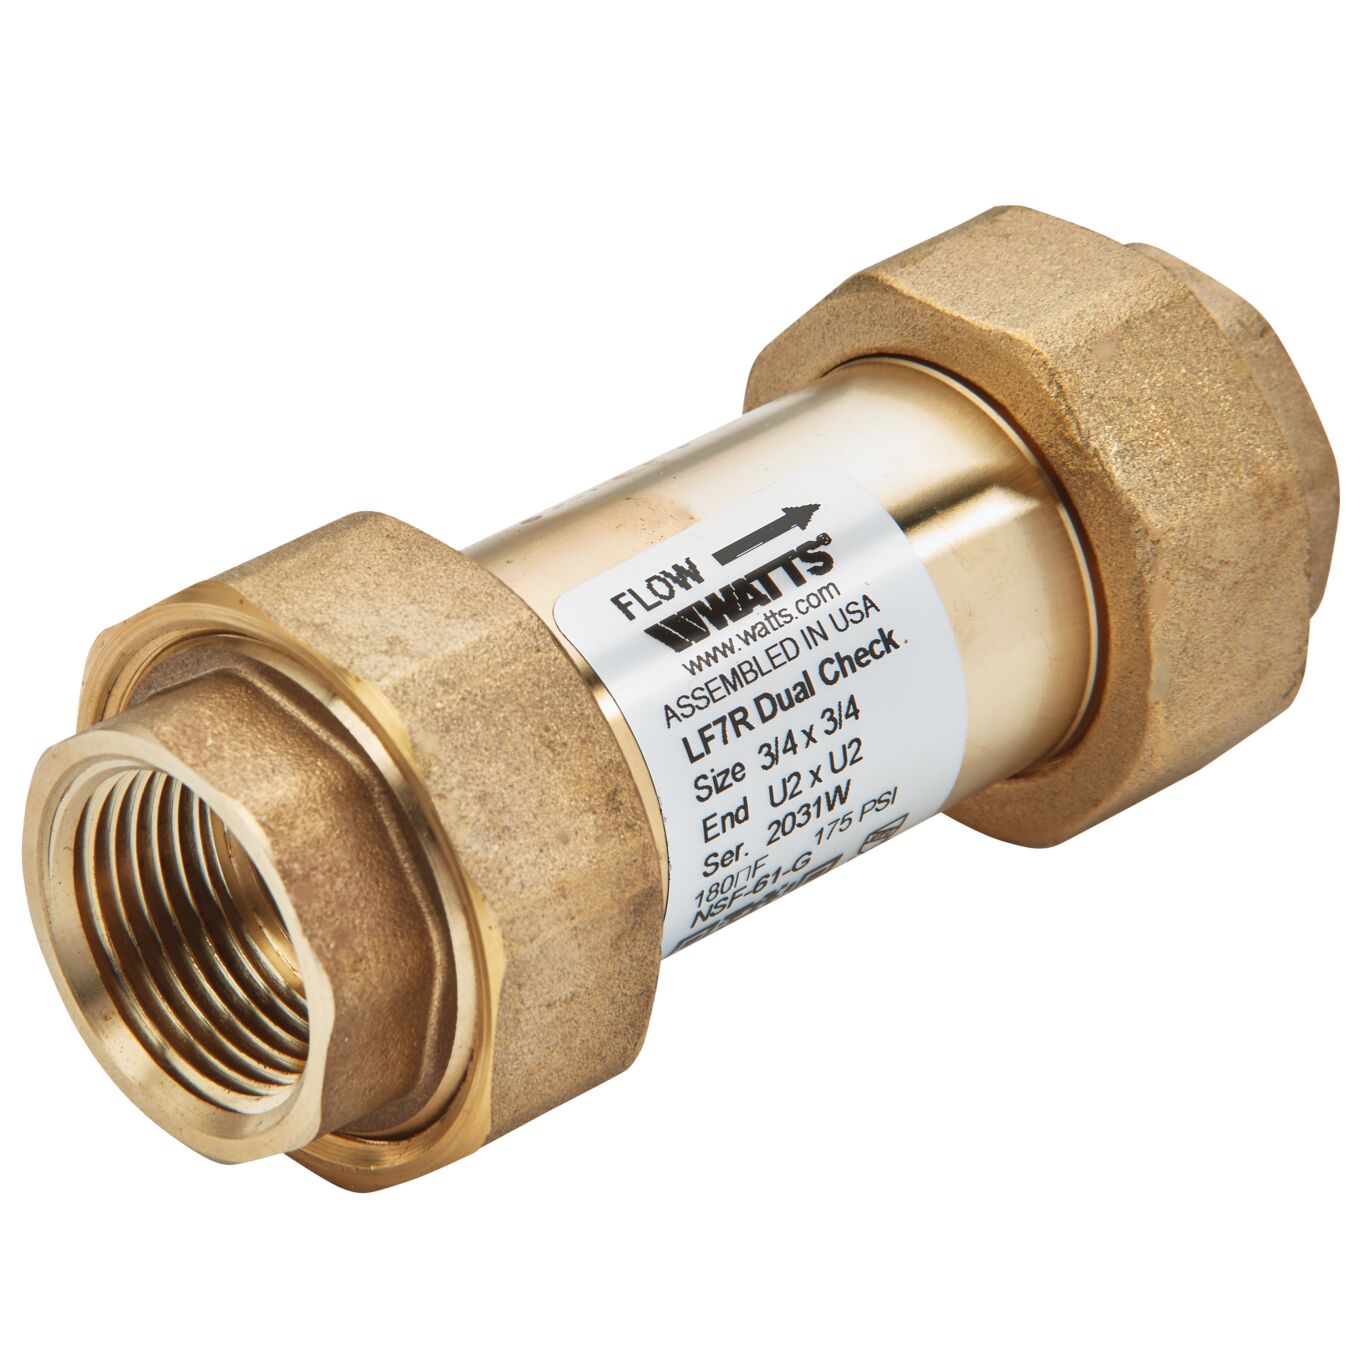 Product Image Lead Free Residential Dual Check Valve